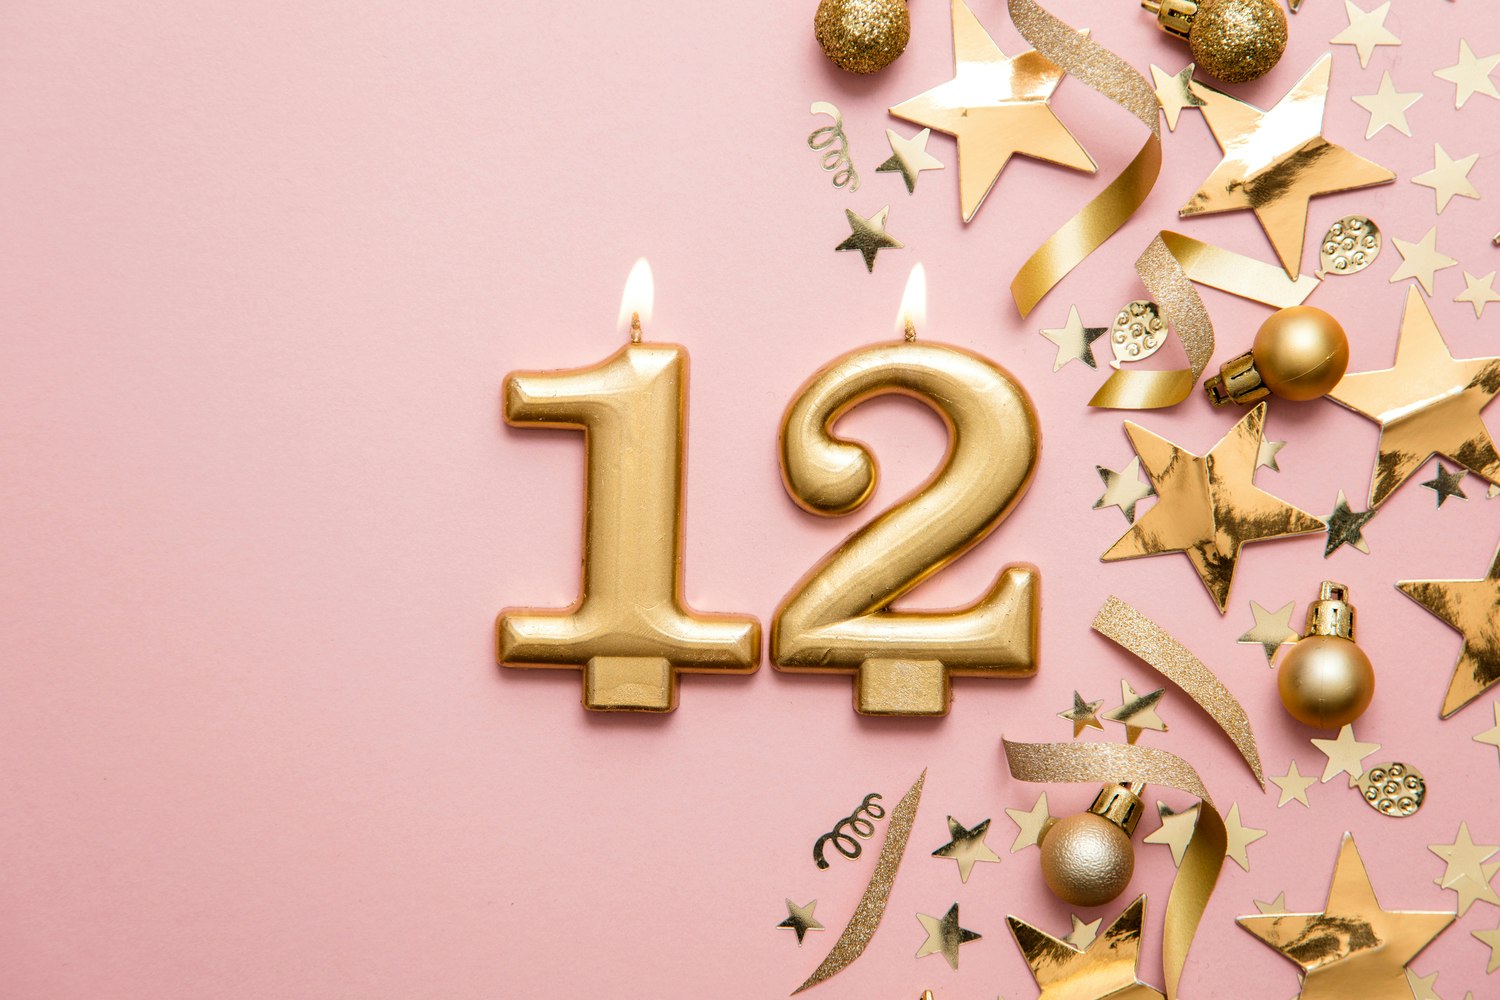 12-Year-Old Birthday Party Ideas - Netmums